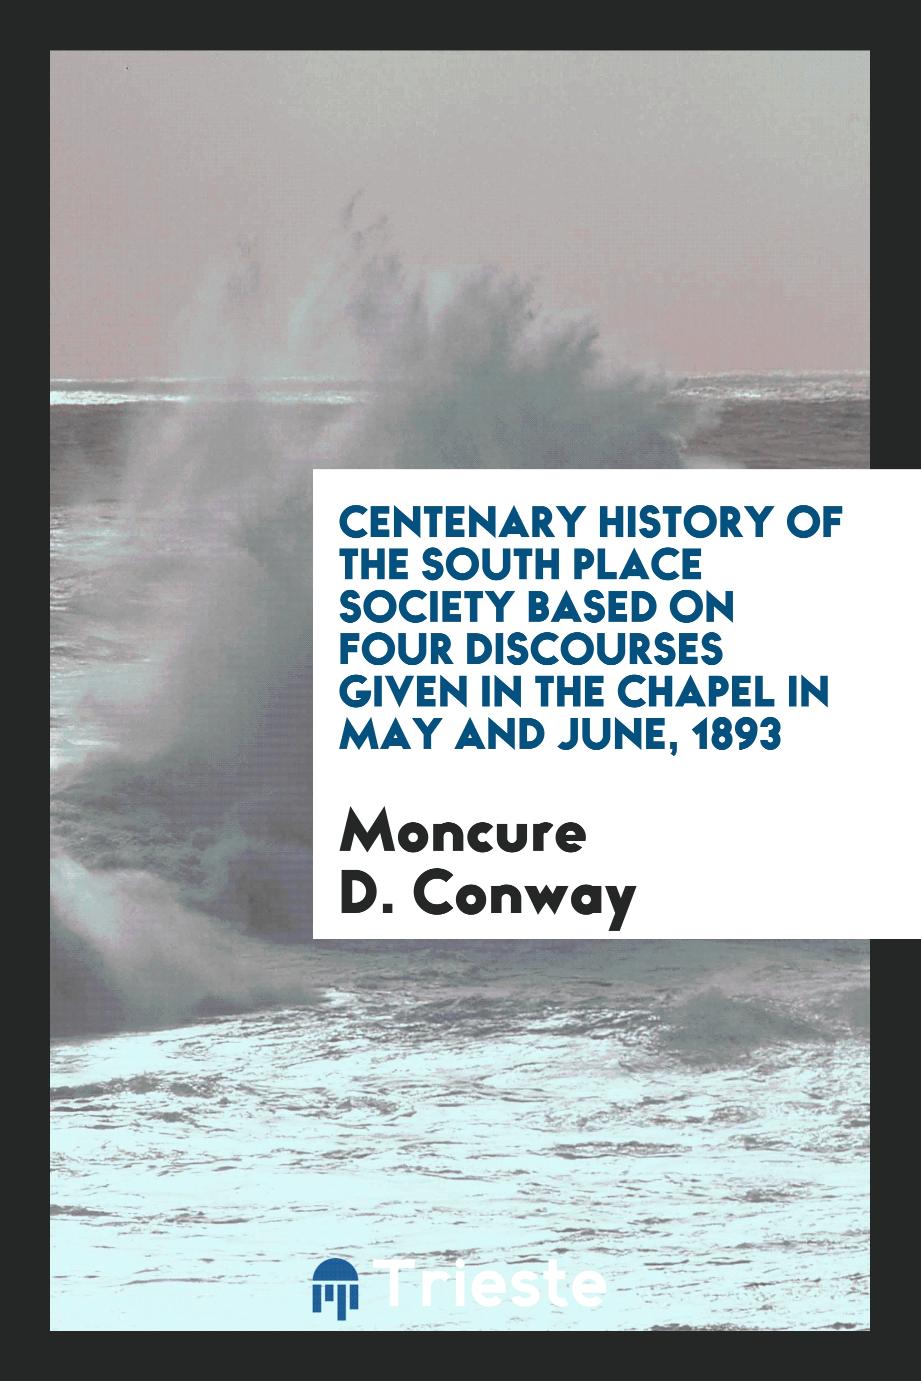 Centenary history of the South Place Society based on four discourses given in the chapel in May and June, 1893